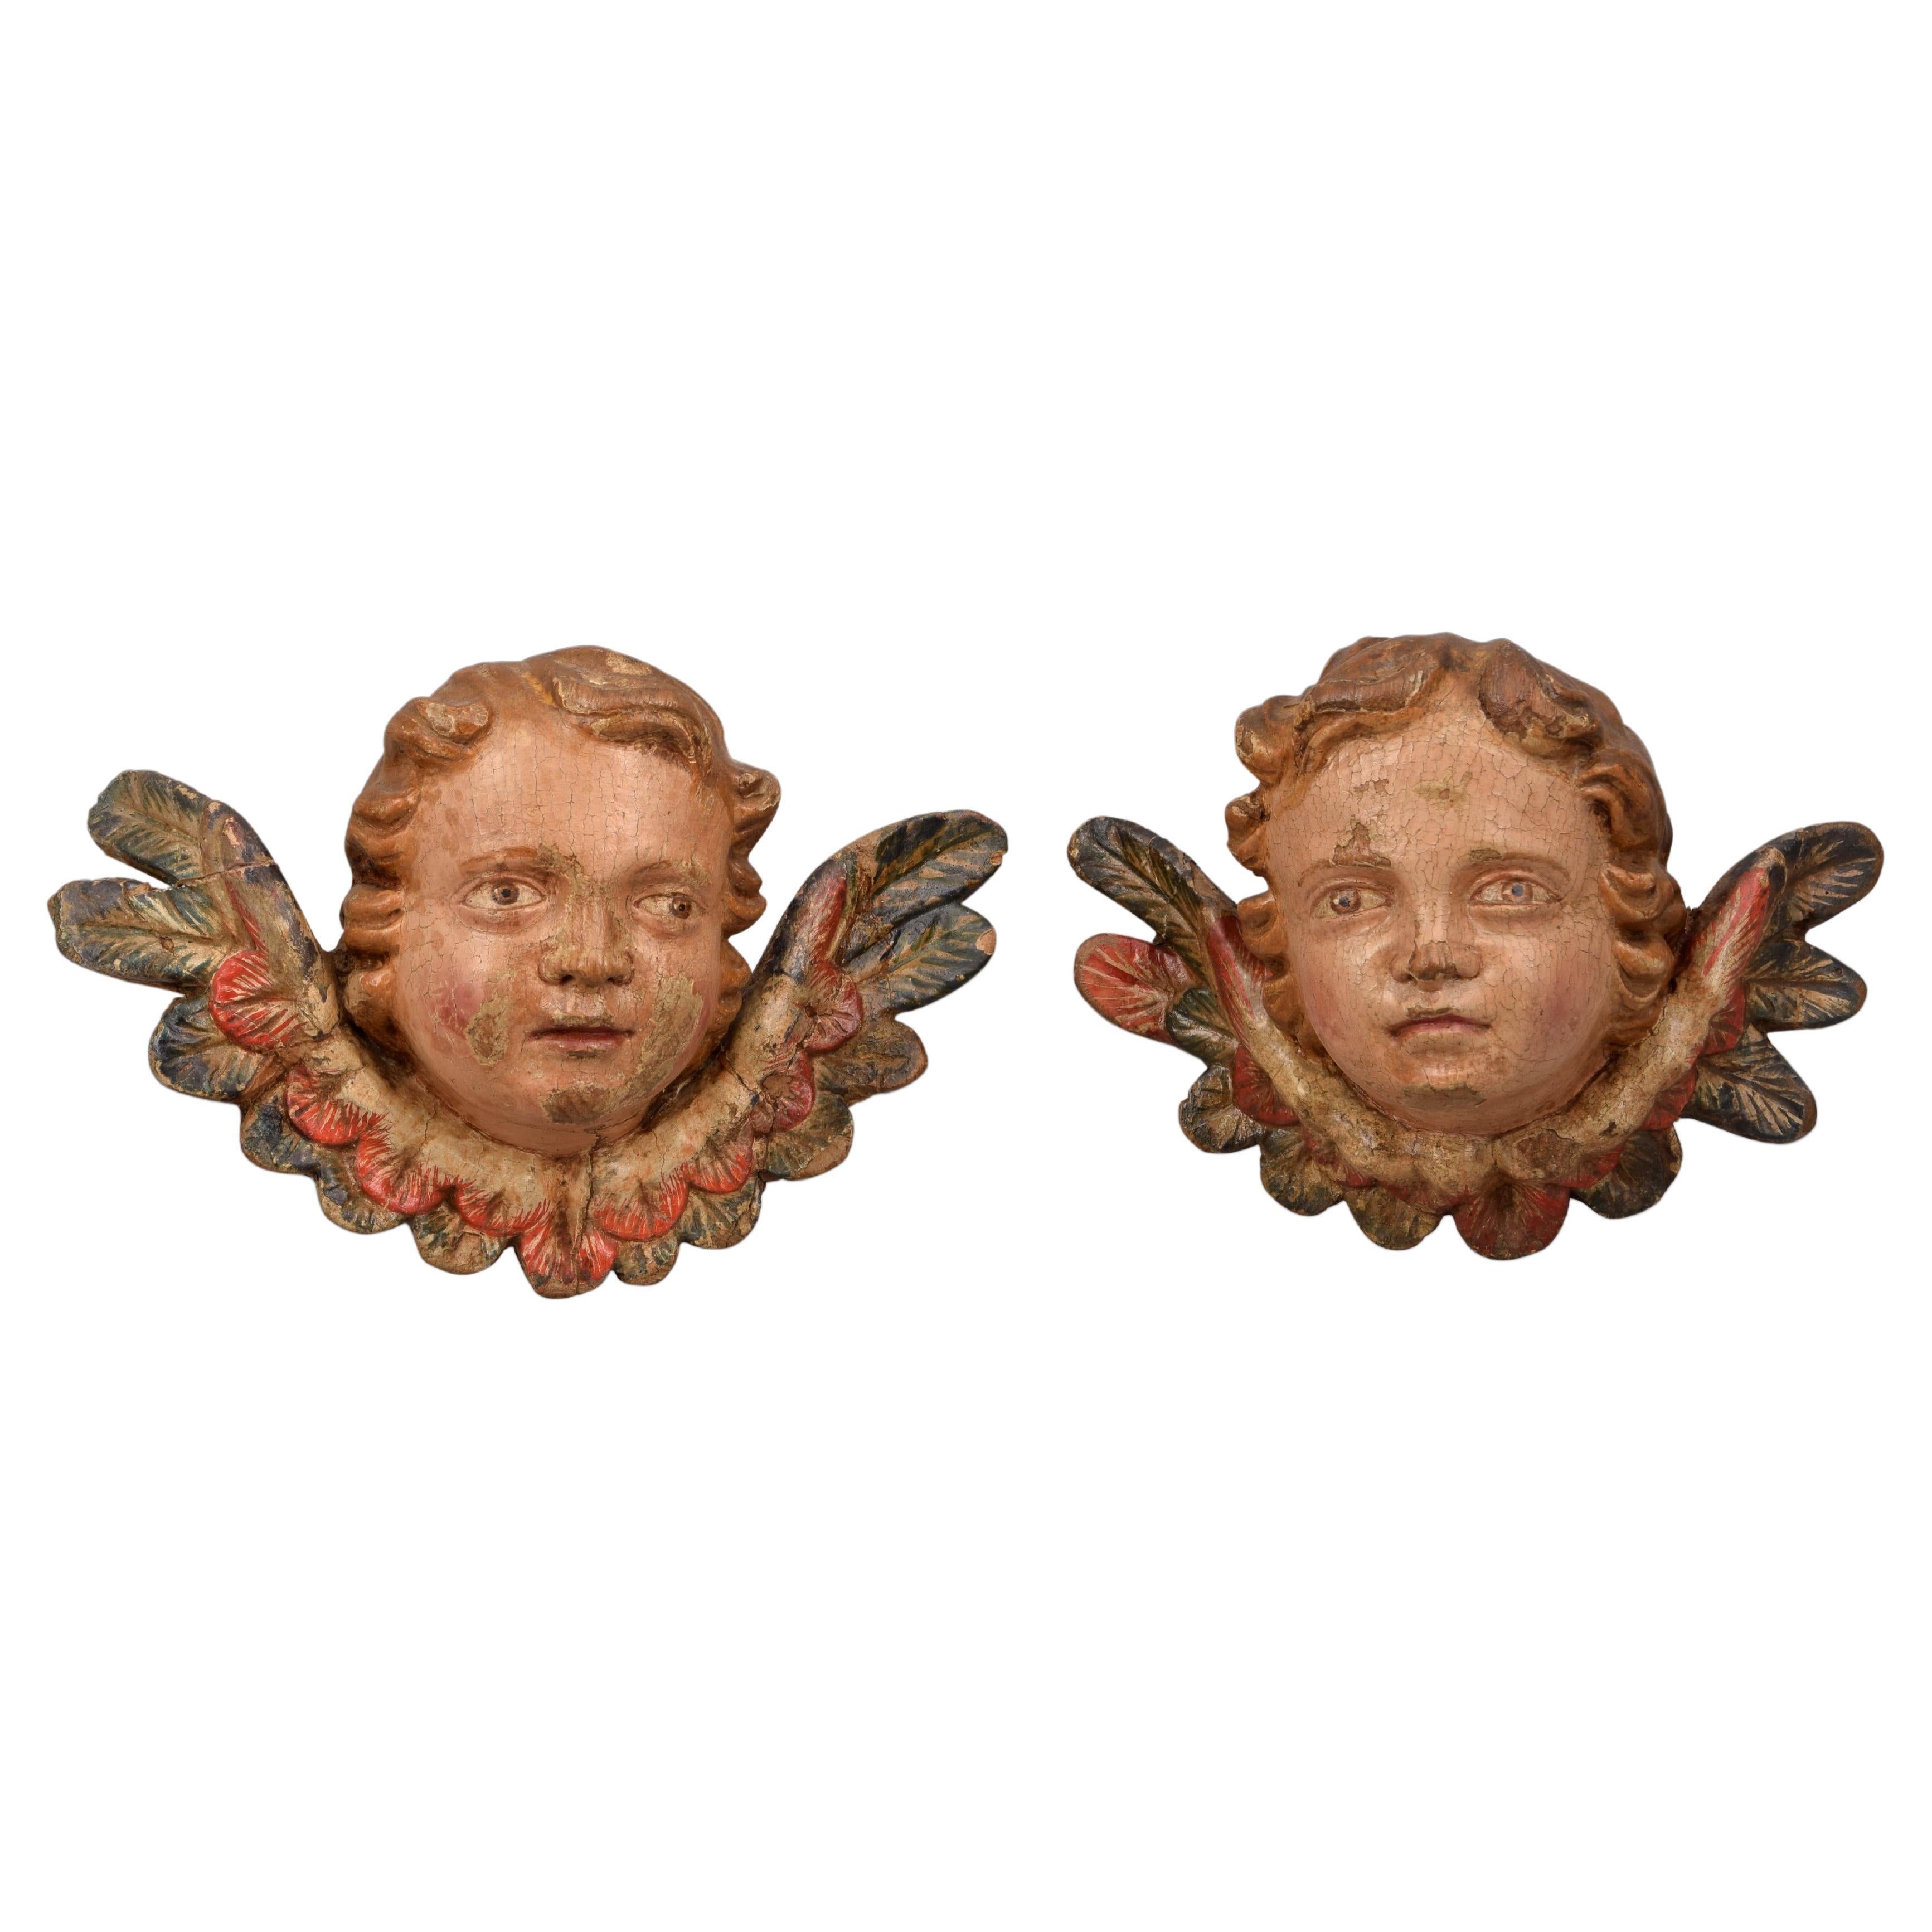 Pair of Angel Heads, Carved and Polychrome Wood, Spanish School, 18th Century